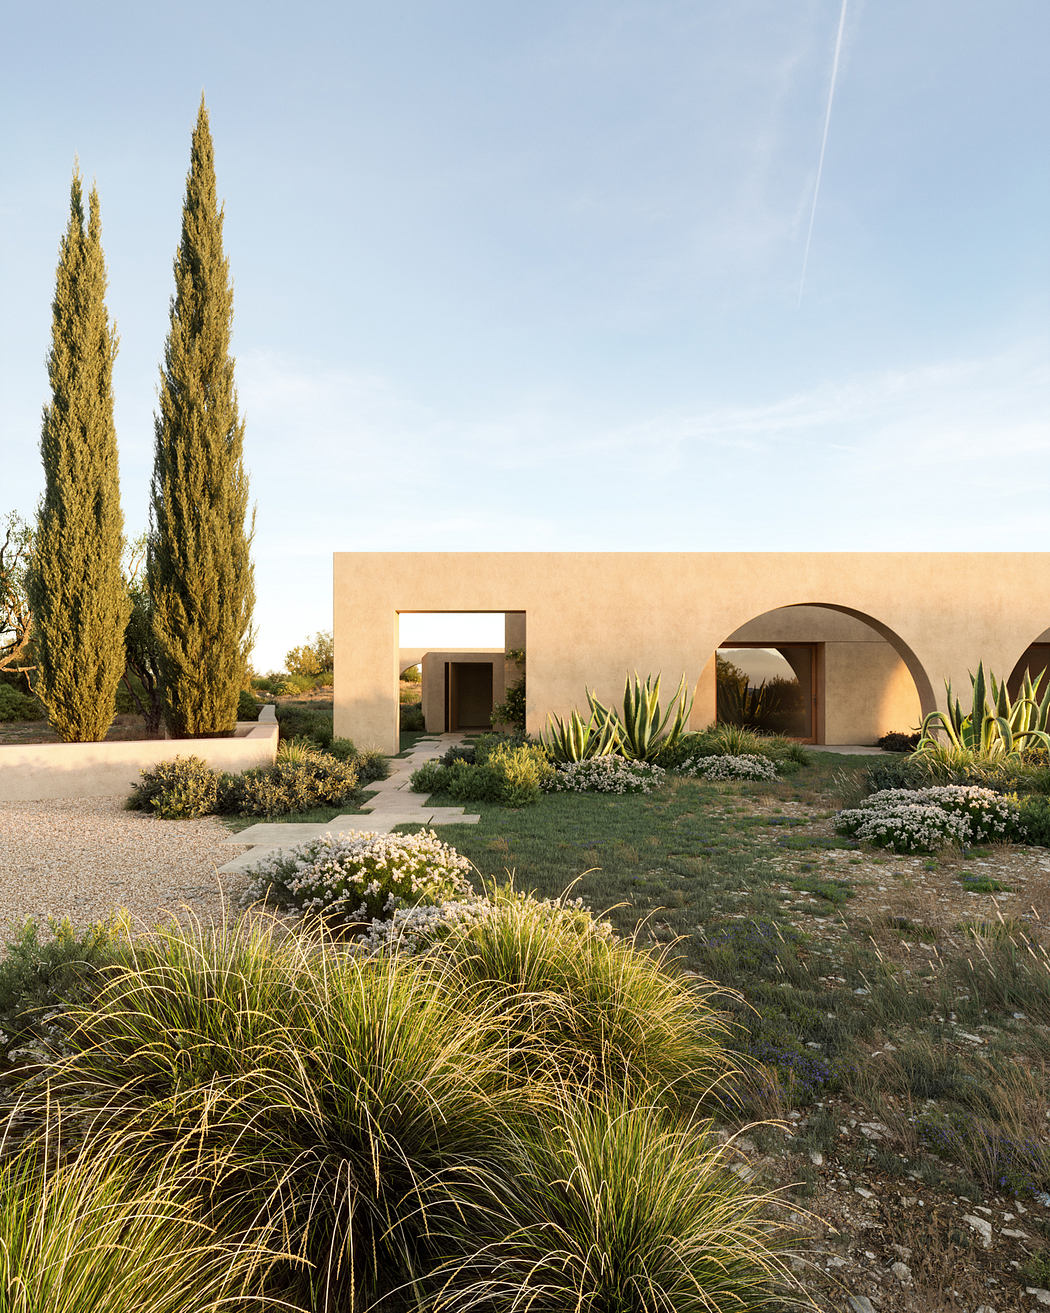 Contemporary building with arches, surrounded by desert landscaping and tall cypress trees